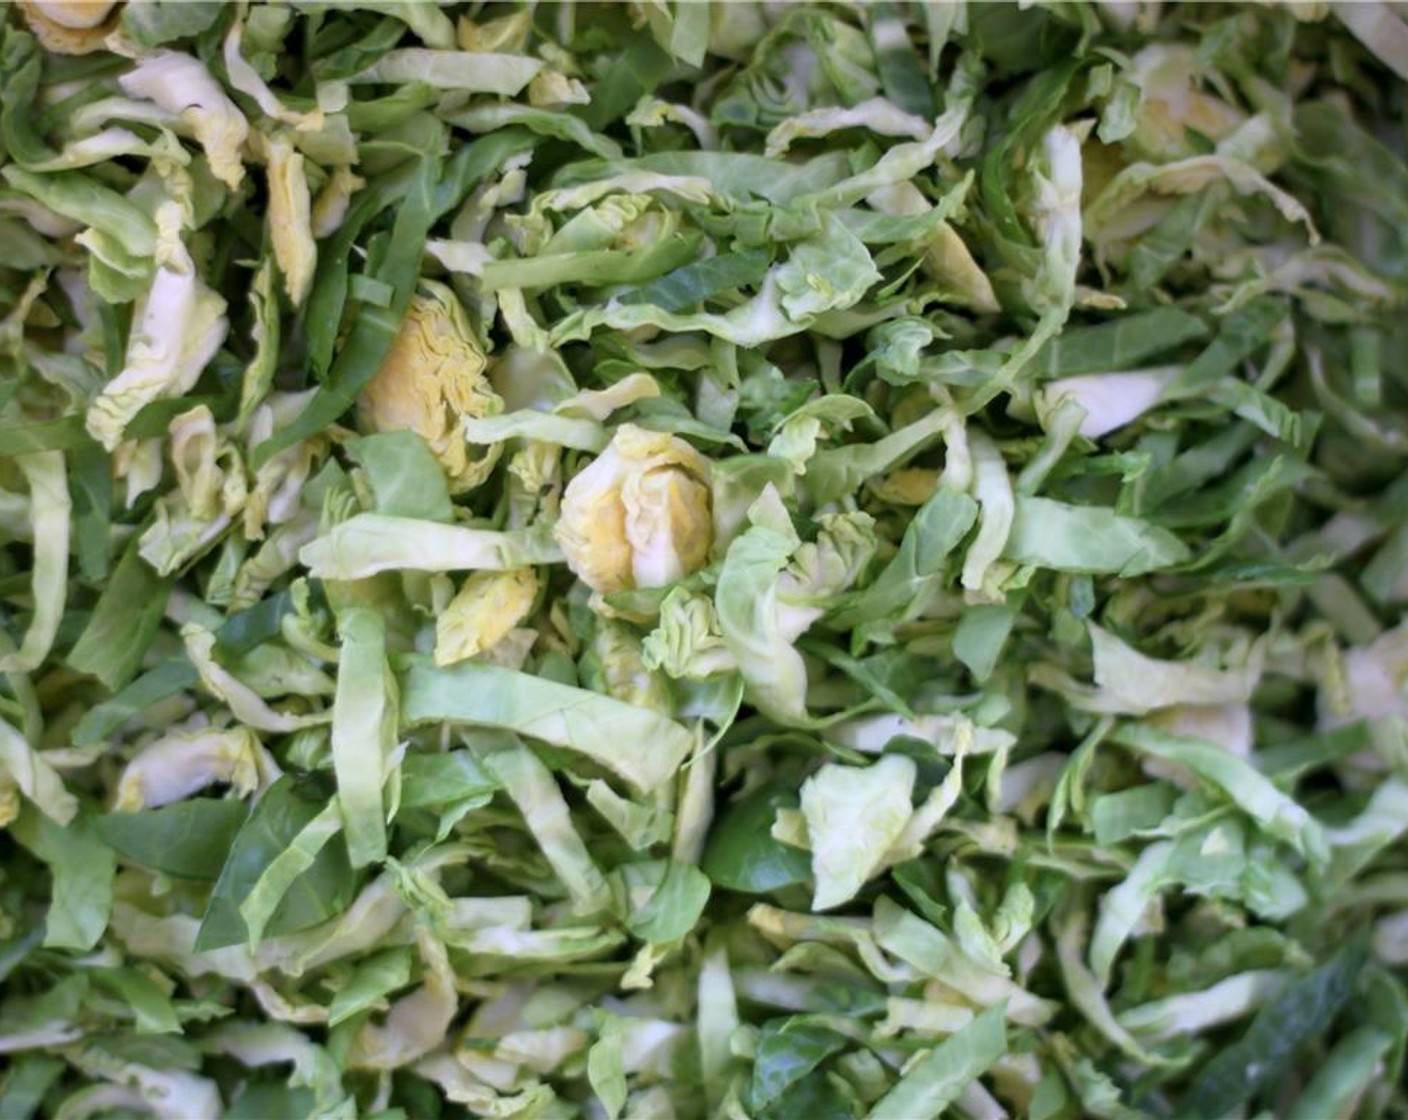 step 2 Once you have your shredded sprouts in a bowl, toss them vigorously to loosen any of the small core pieces from the shredded leaves.  Pick through the leaves to remove any pieces that might seem unpleasant to chew in a salad.